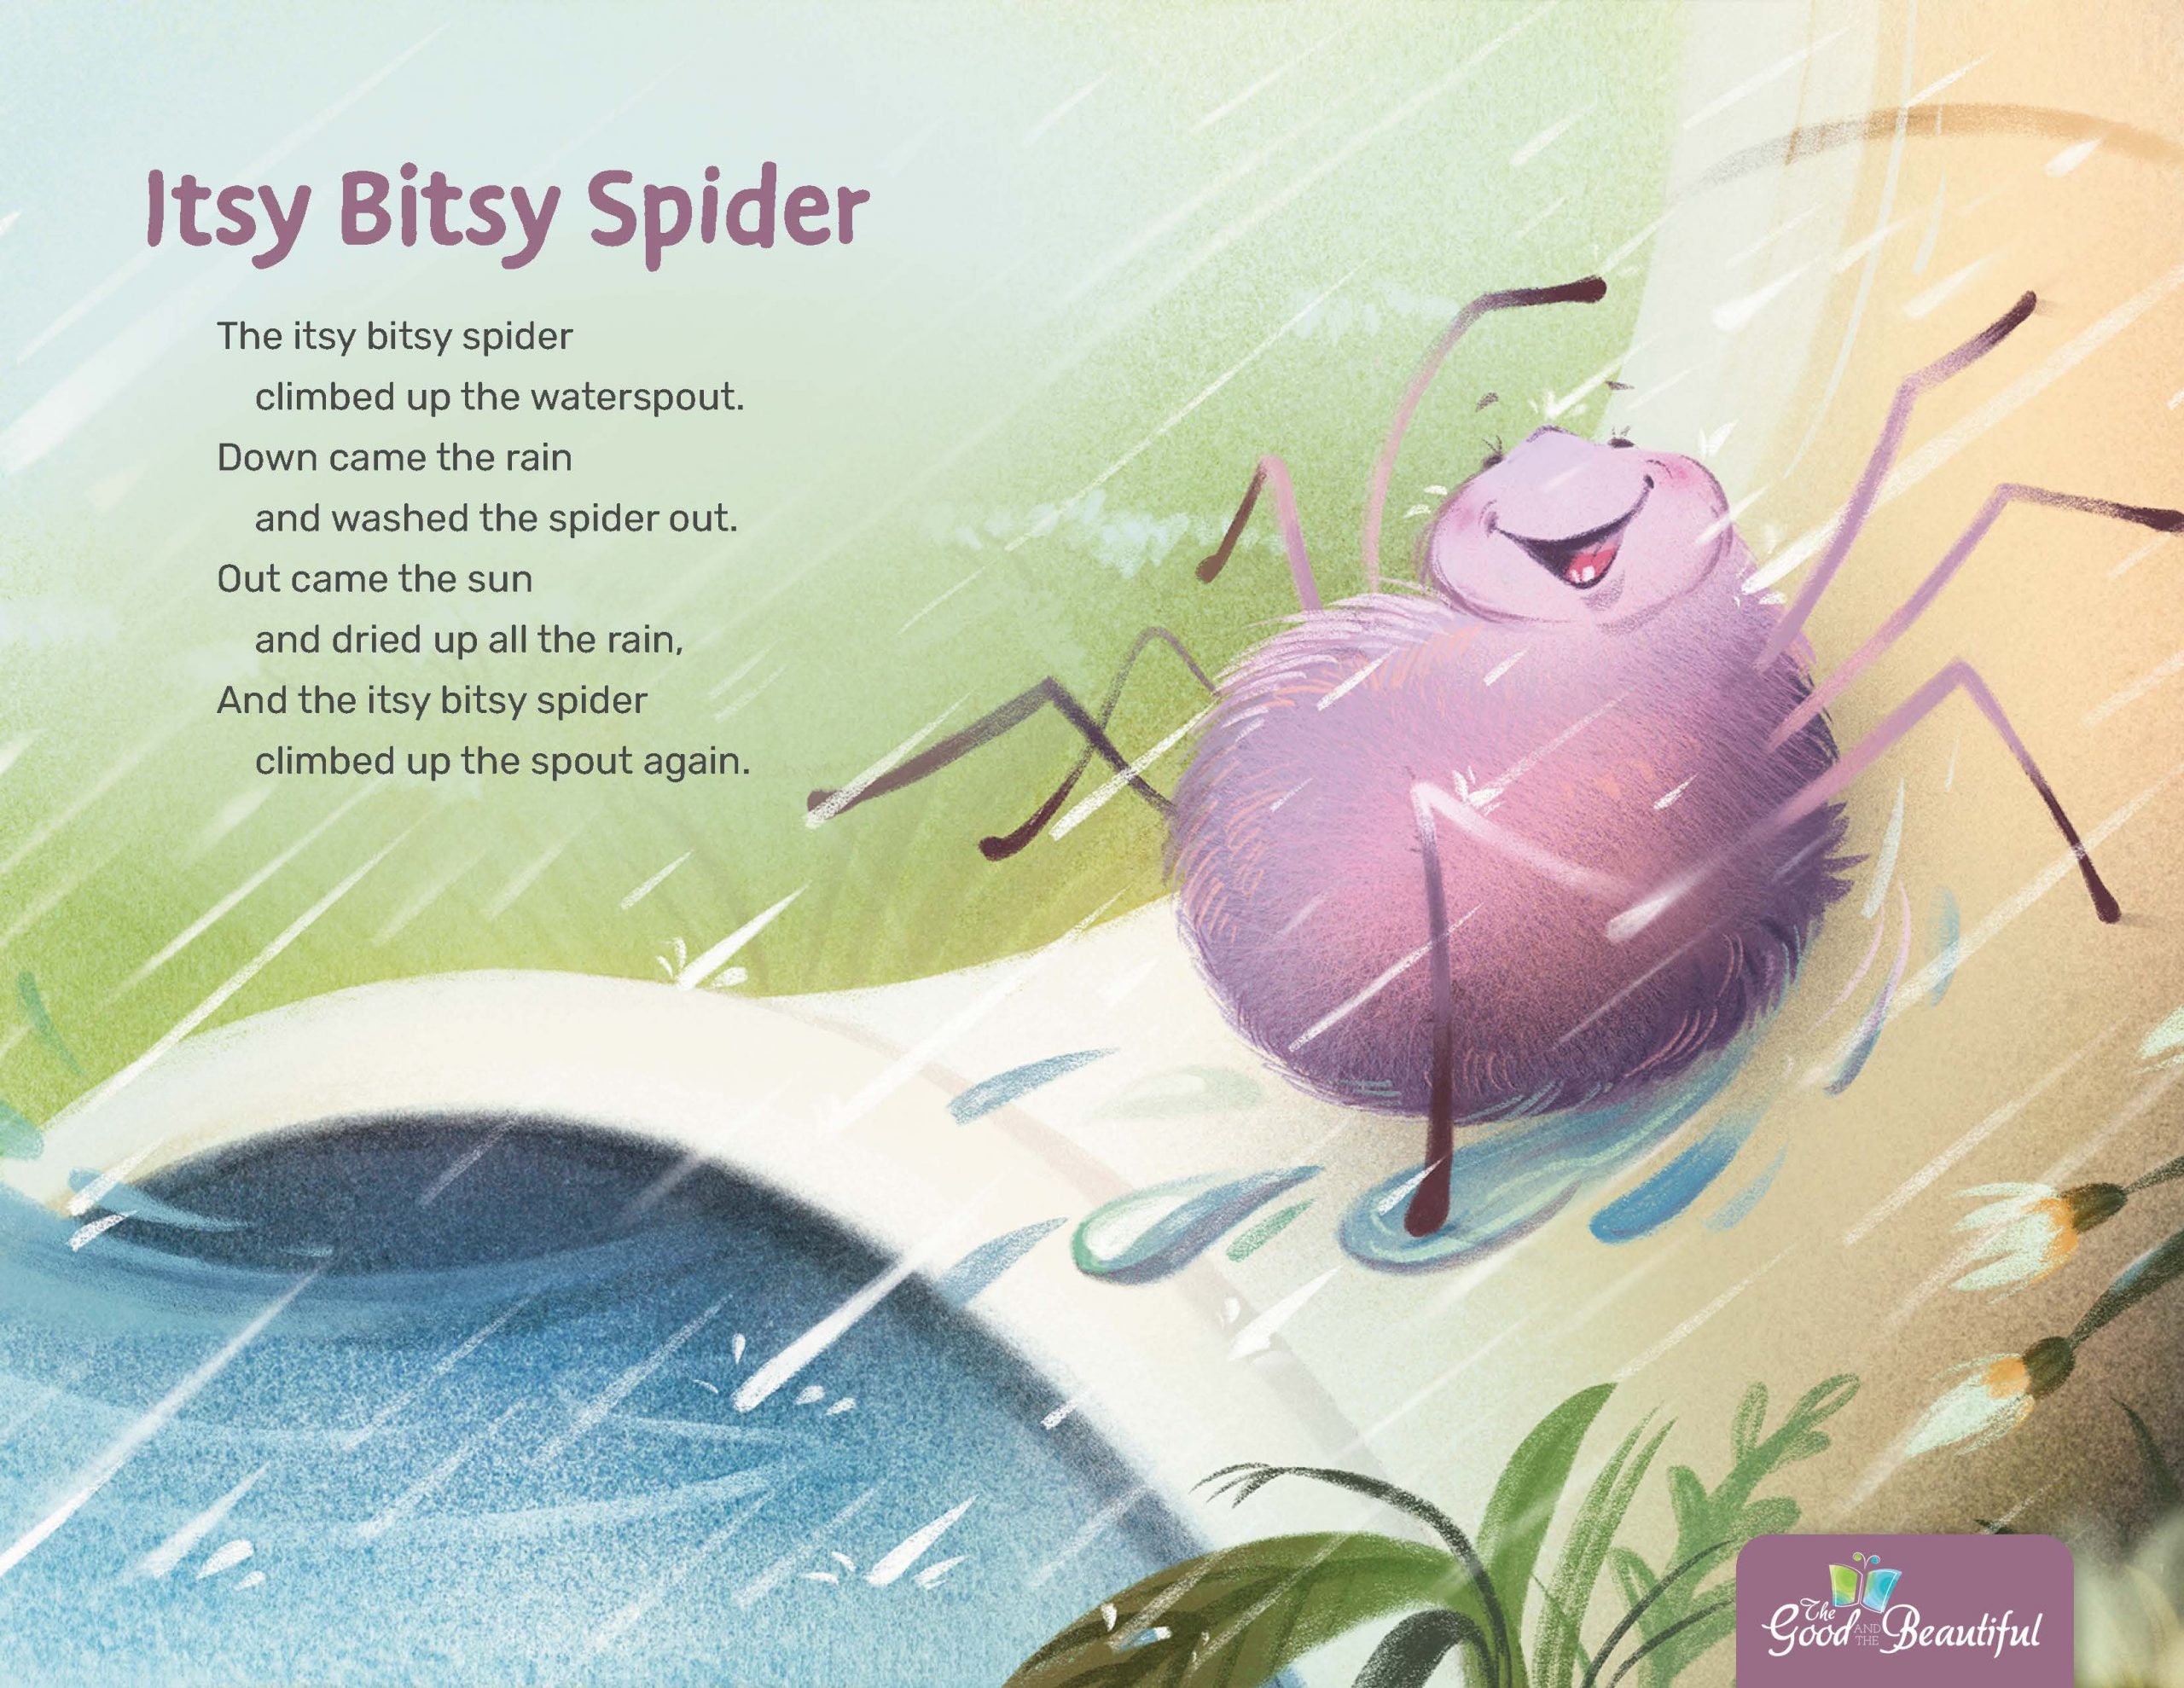 Spider Songs: I Wish I Were an Eensy Weensy Spider